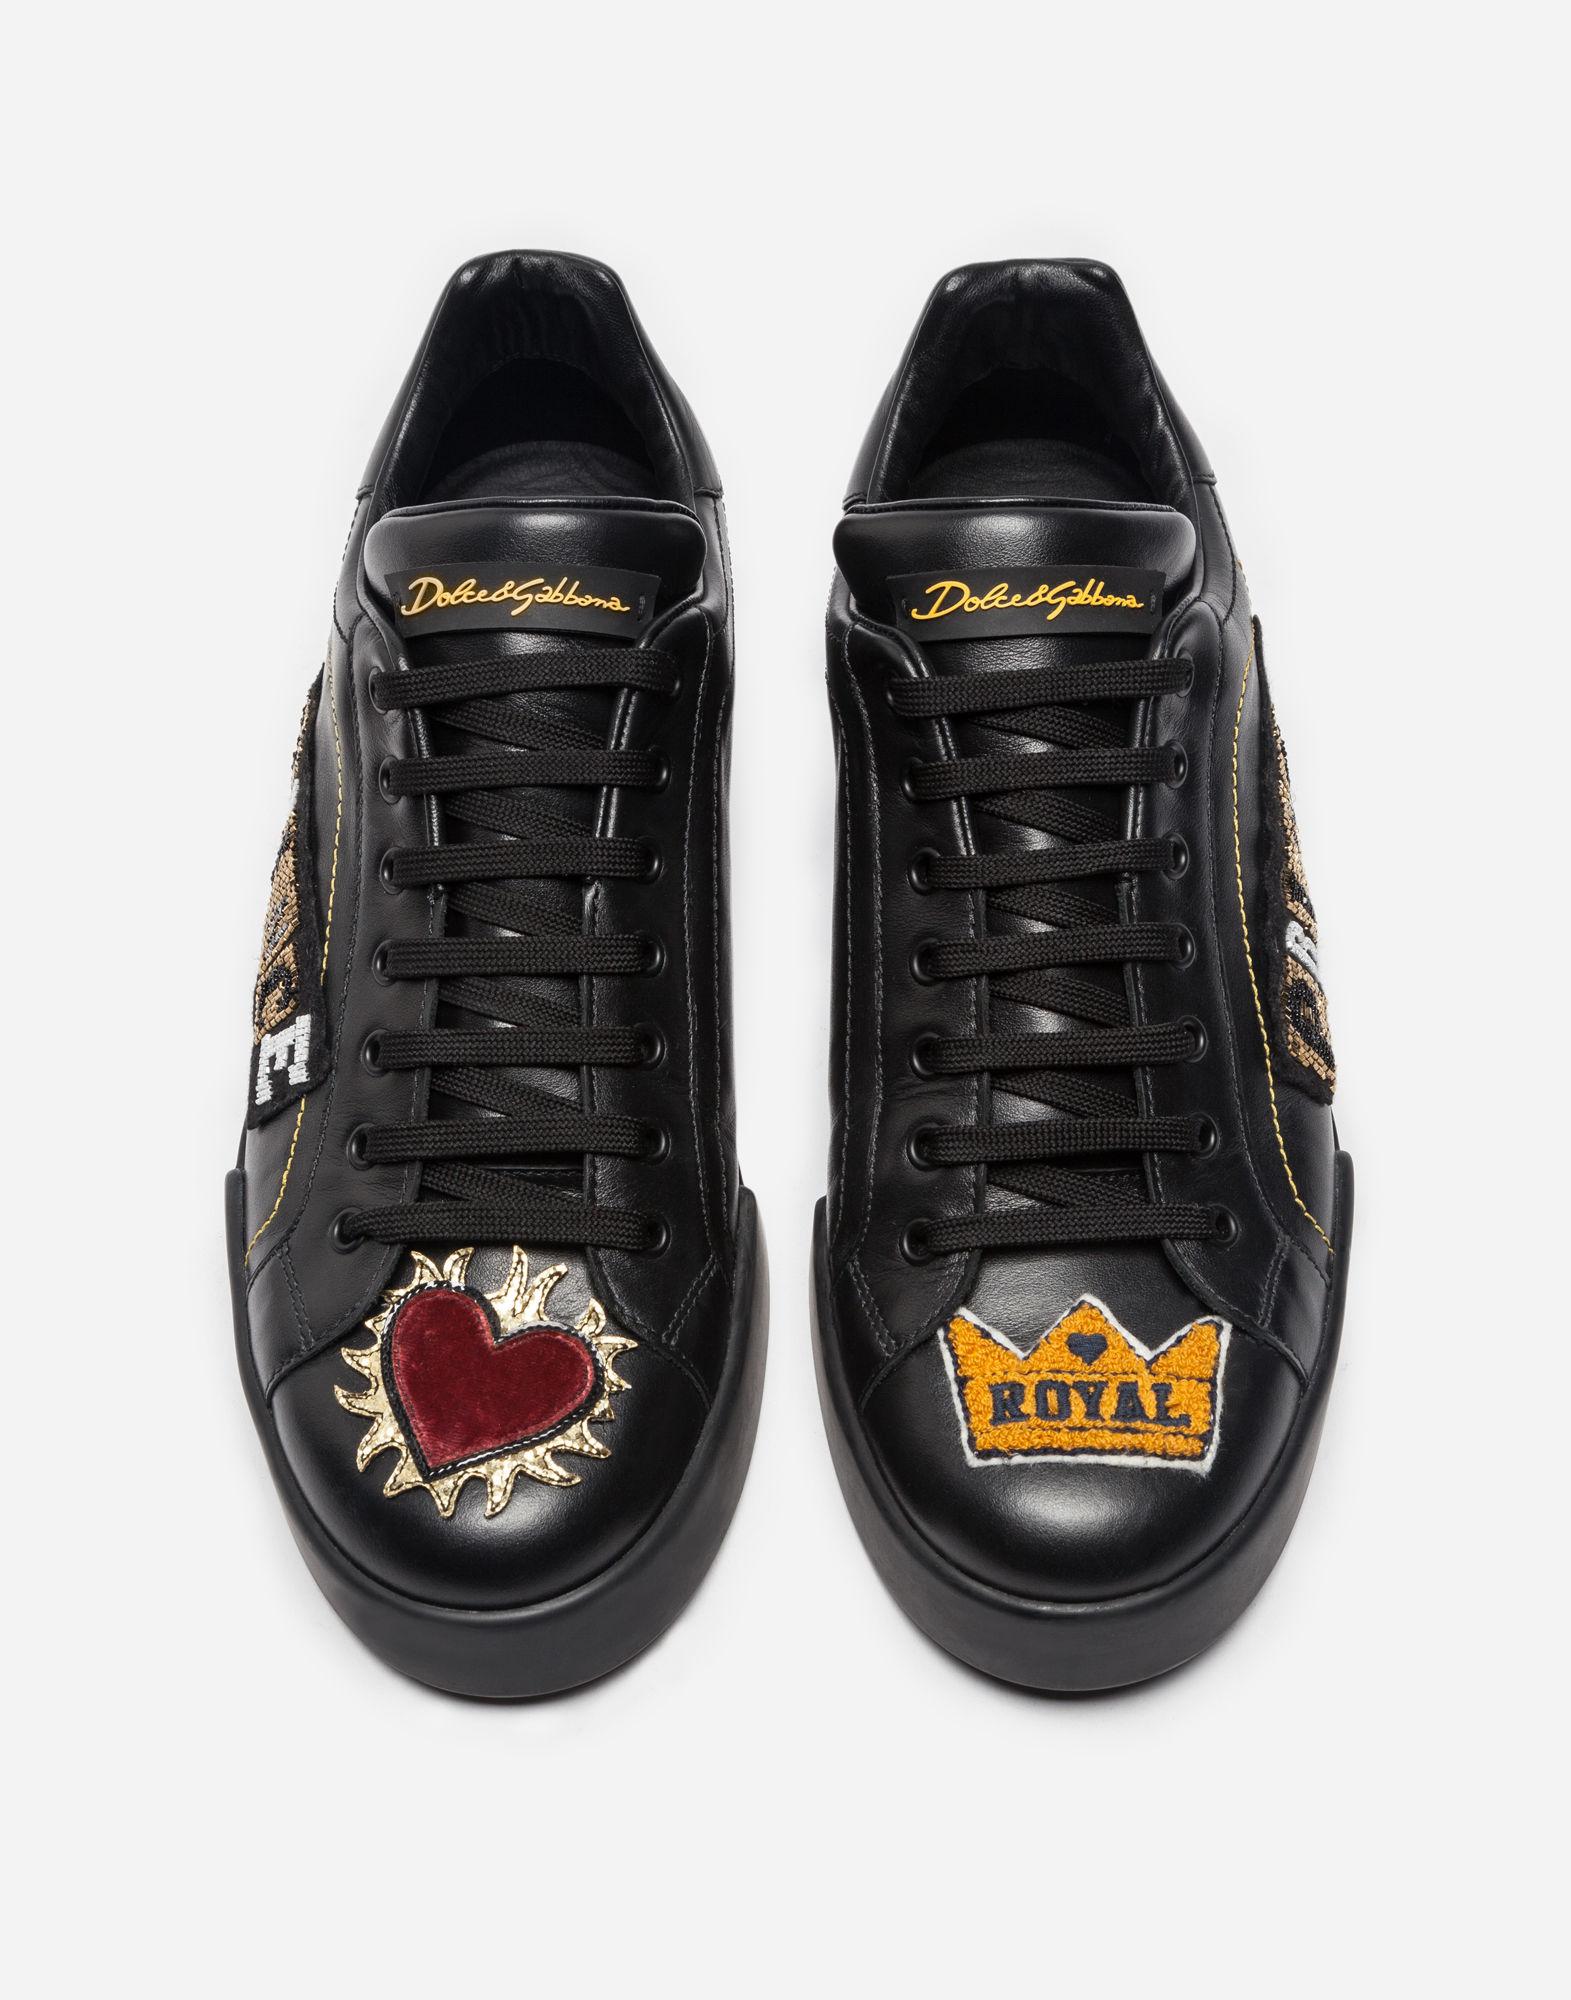 Dolce & Gabbana Leather Sneakers With Appliqués in Black - Lyst